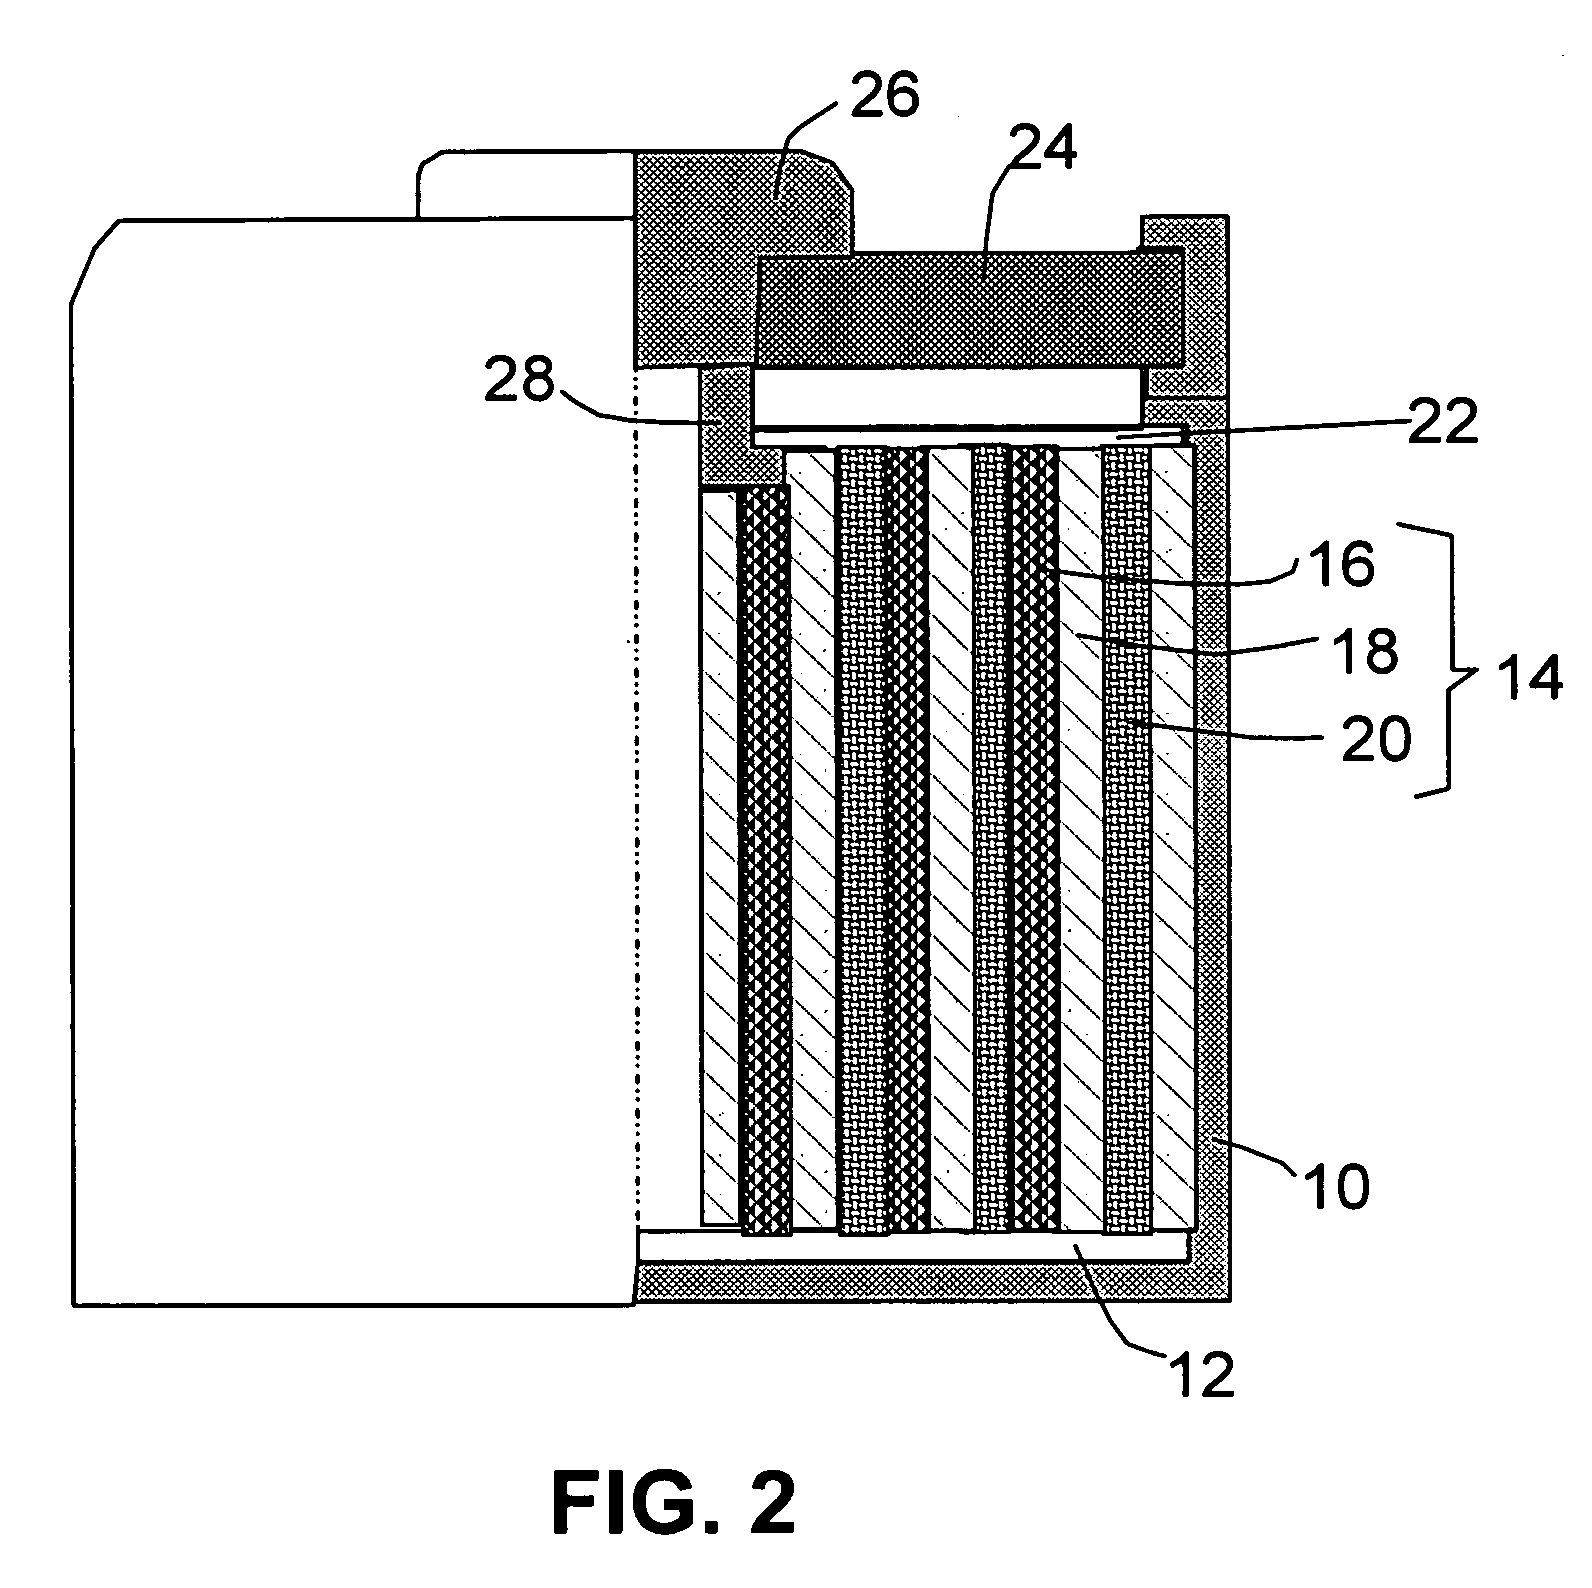 Process for producing hybrid nano-filament electrodes for lithium batteries